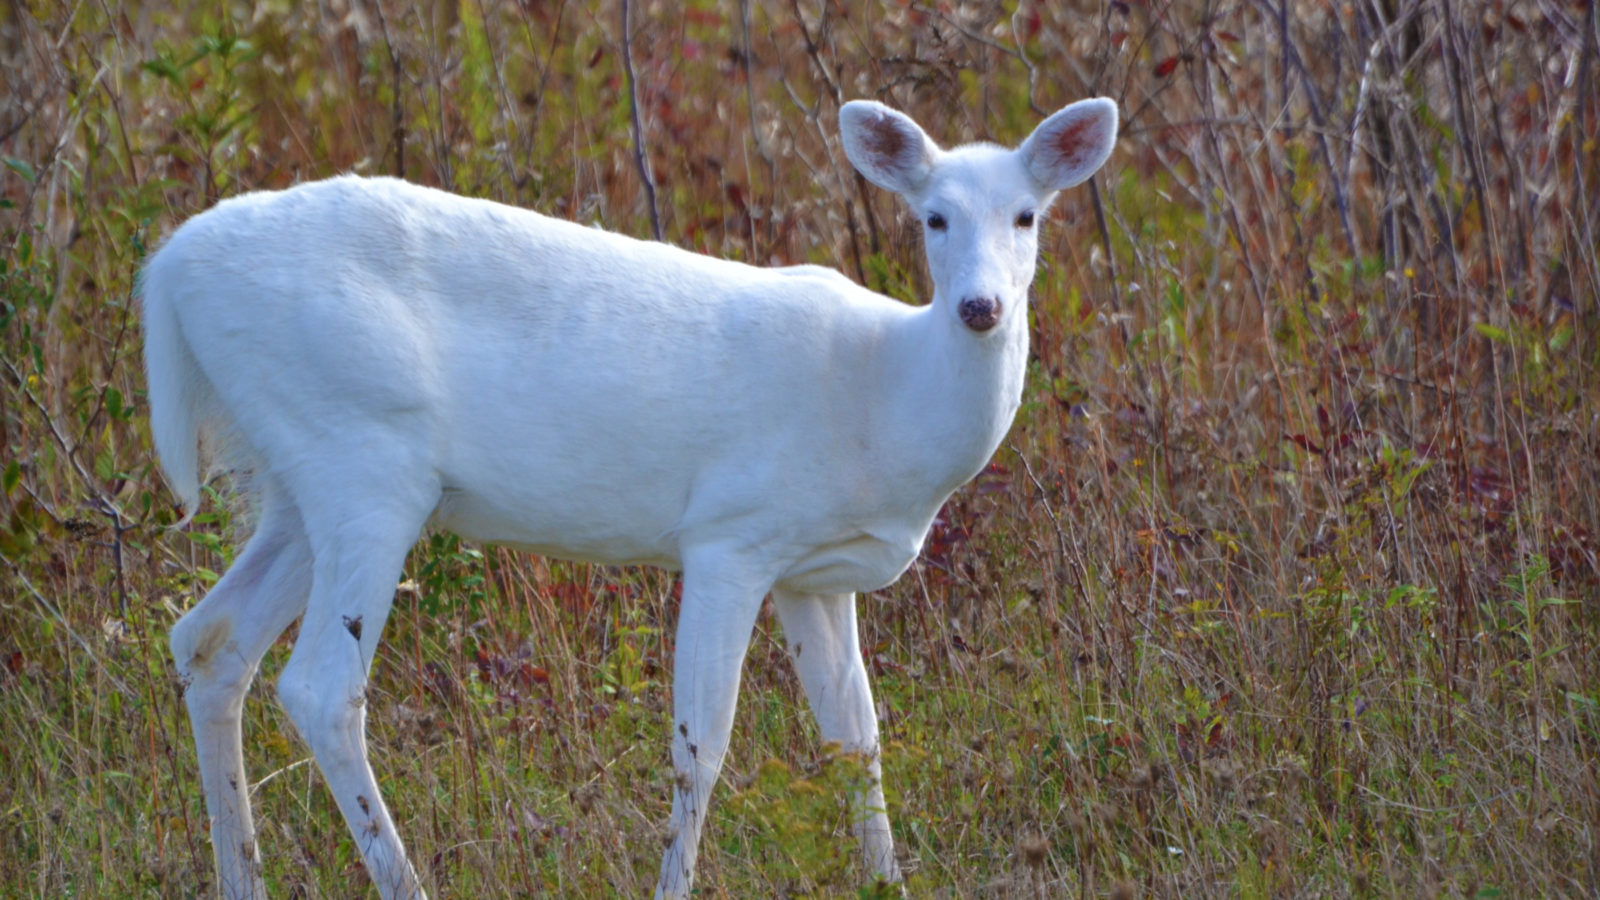 How rare is a white whitetail deer?